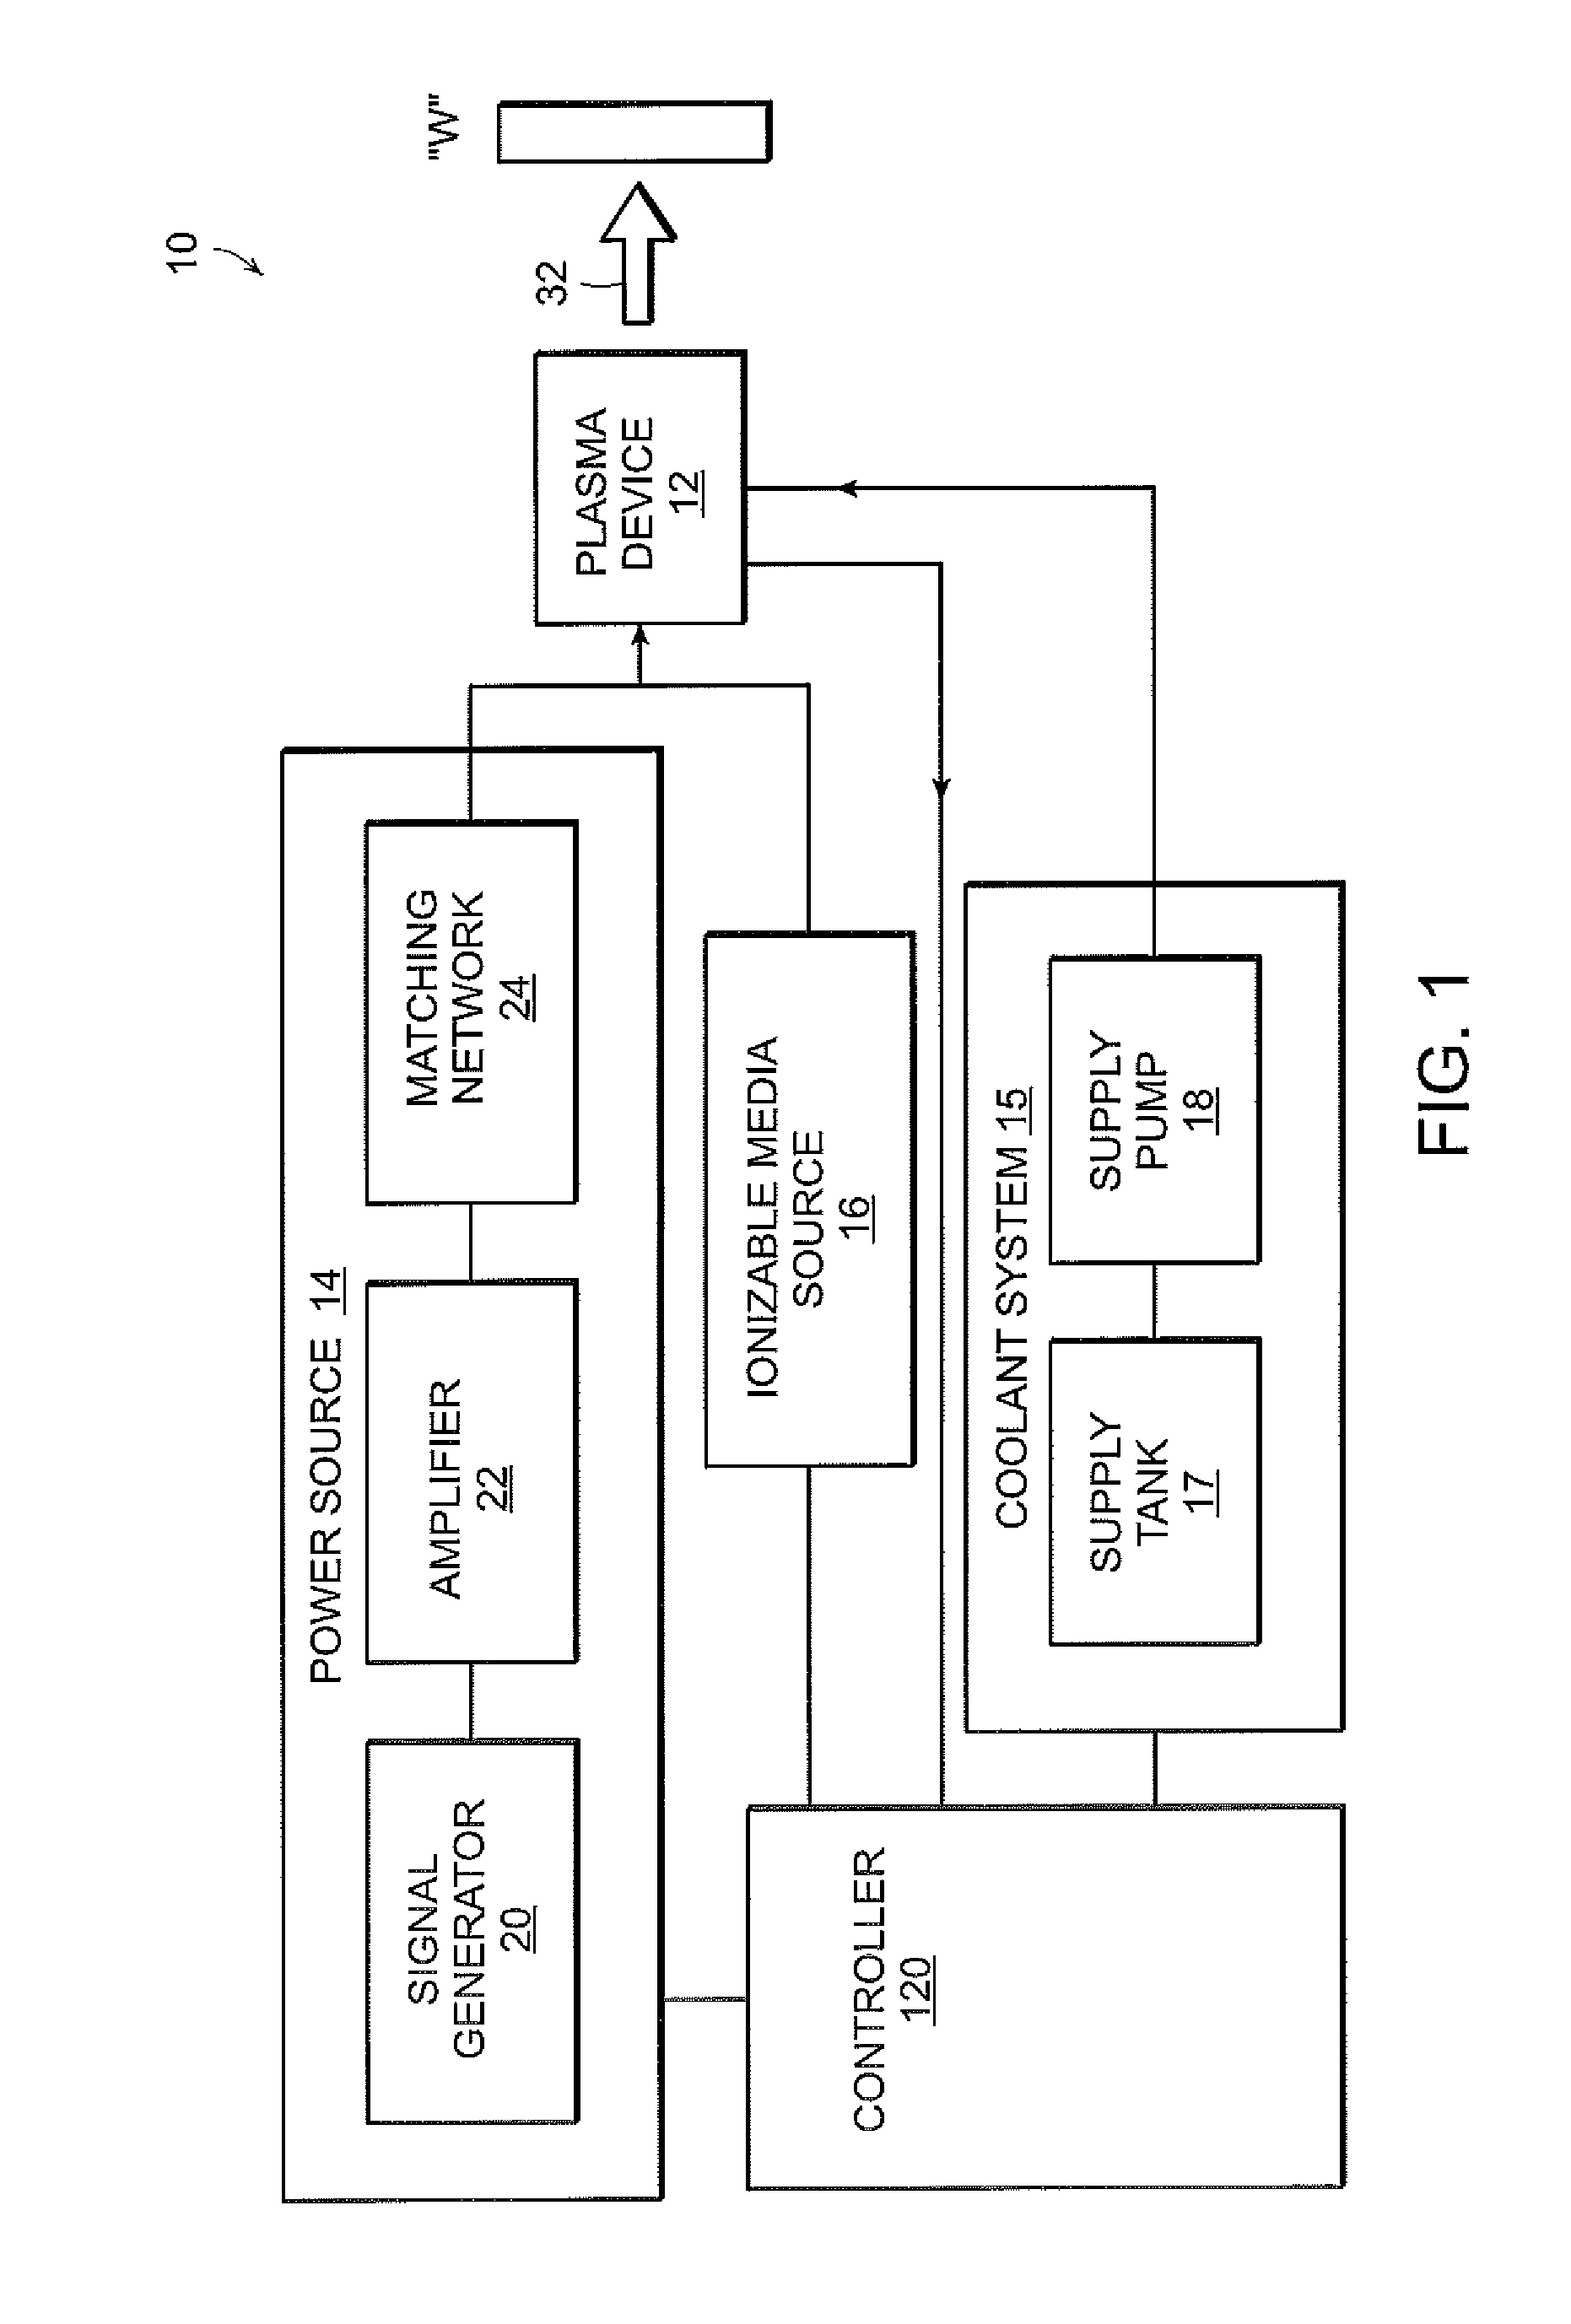 System and method for removing medical implants